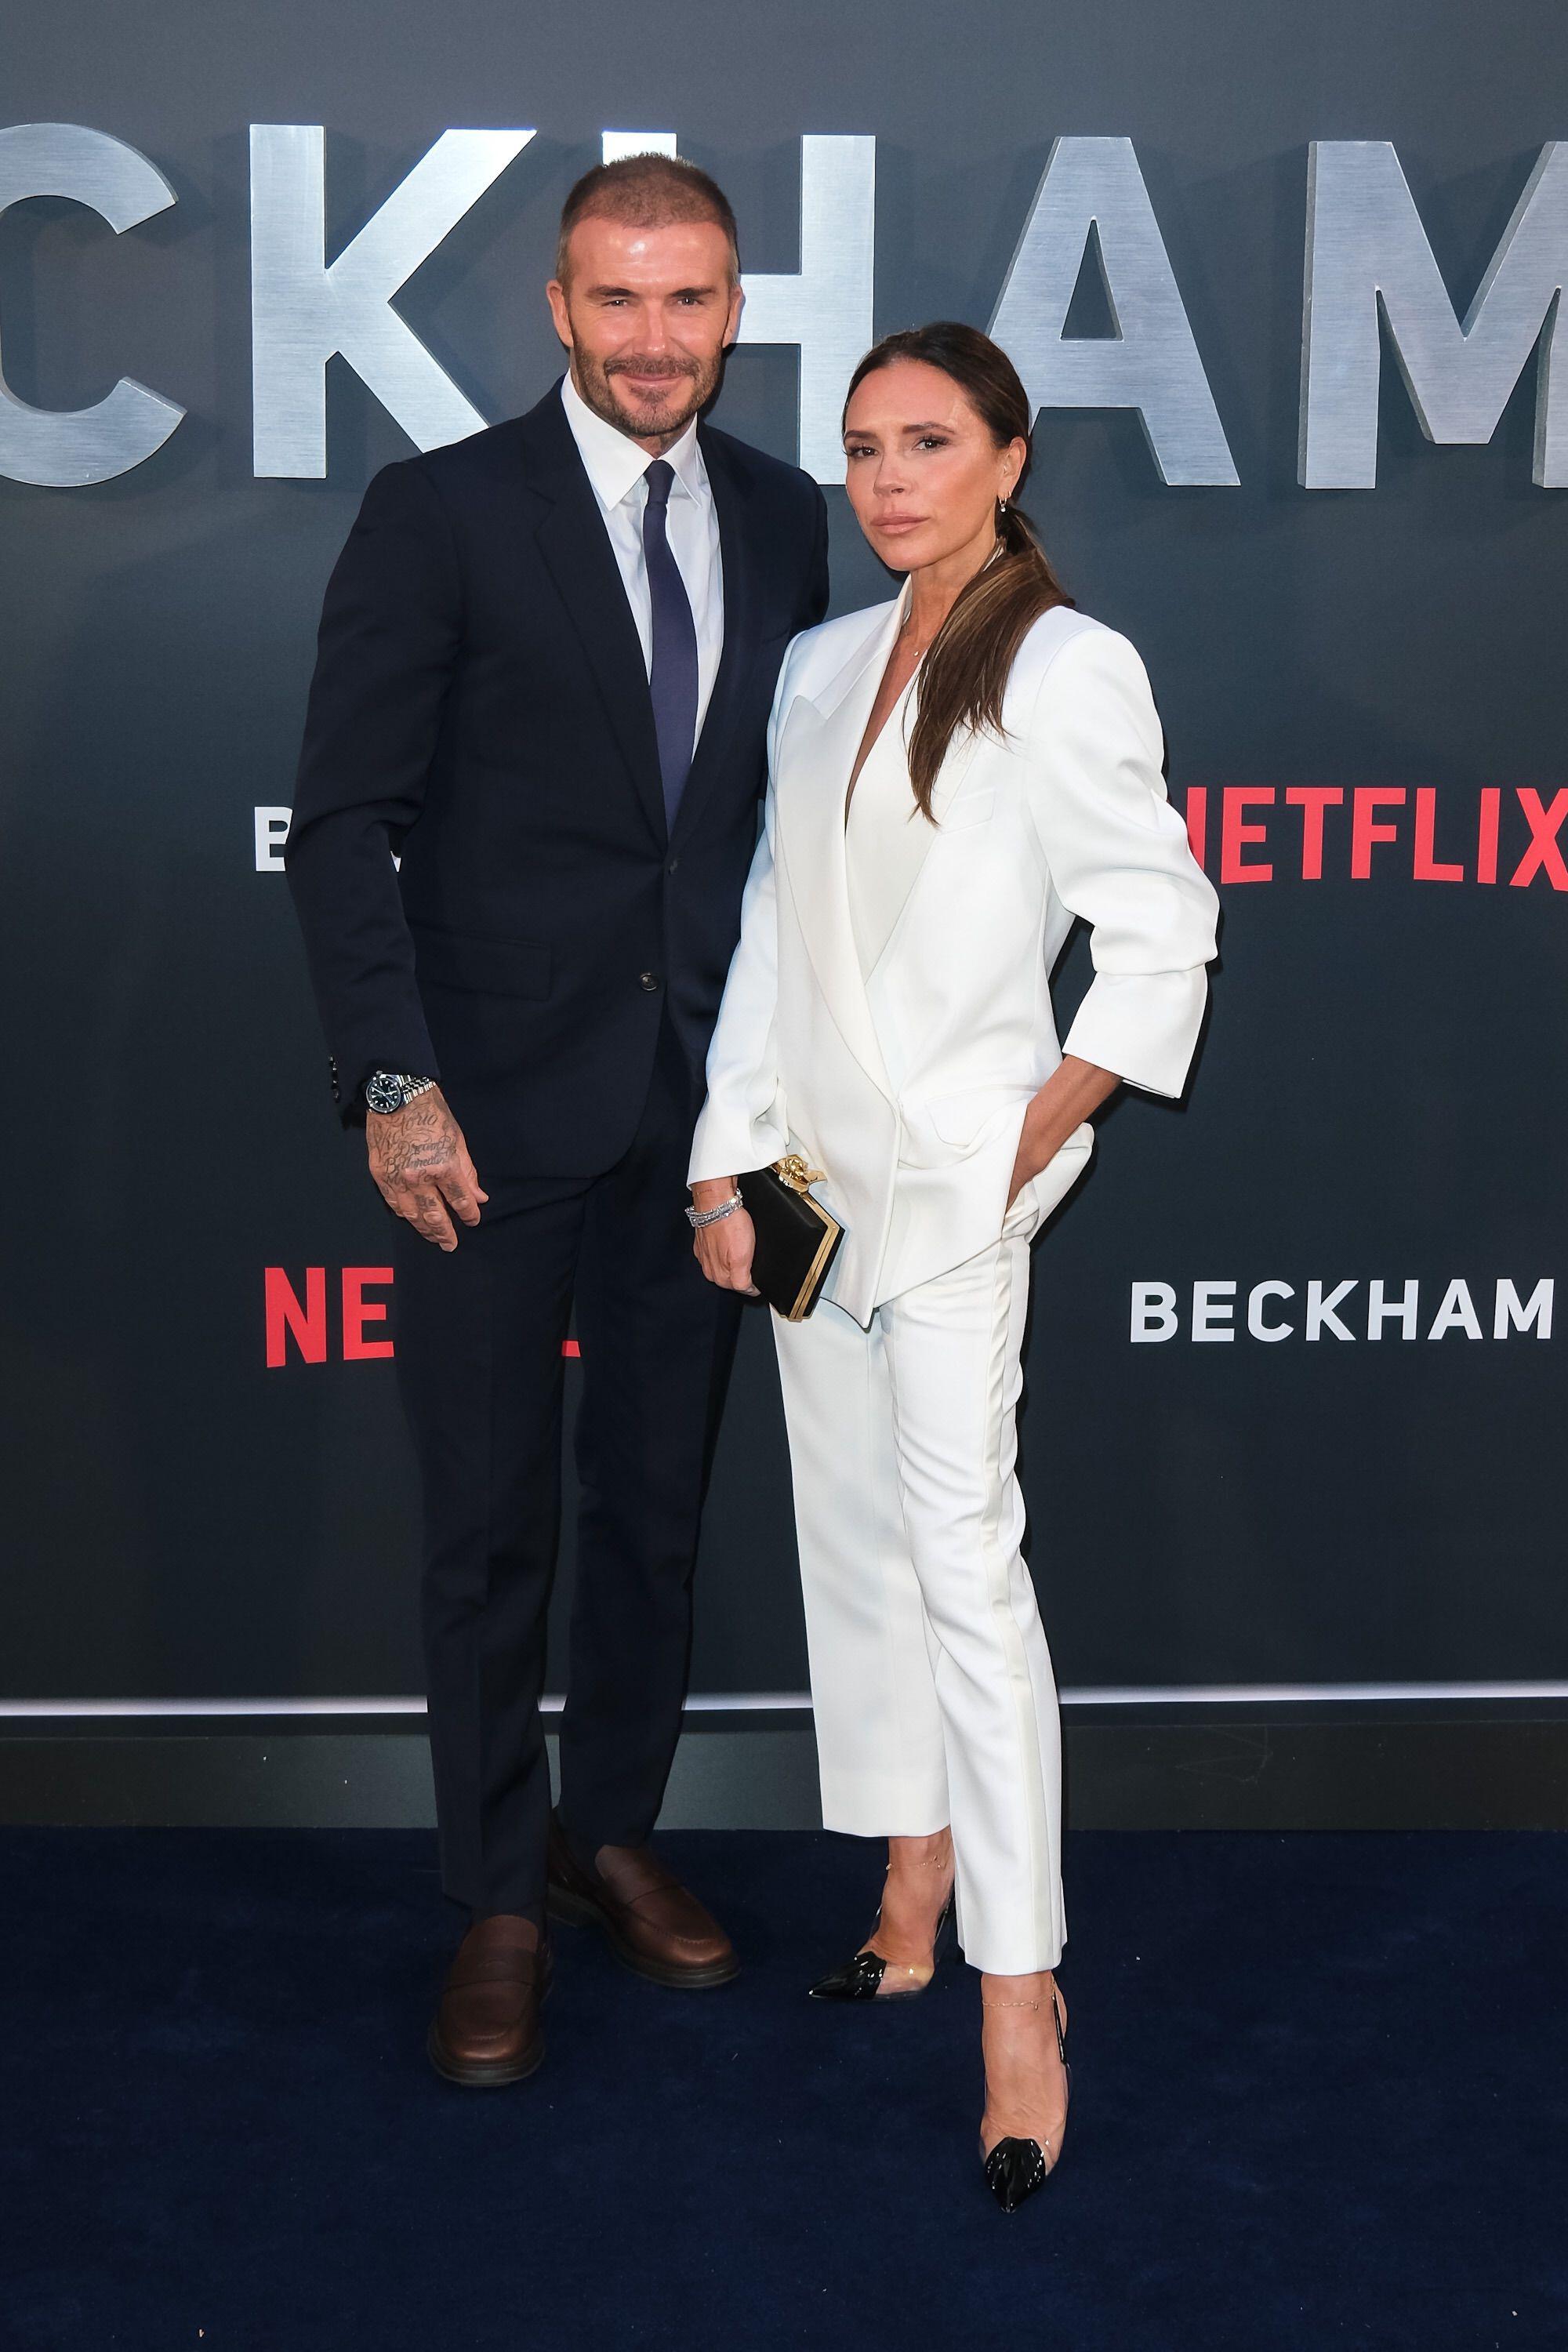 The Beckhams have showed that a pop star and sports star romance can work